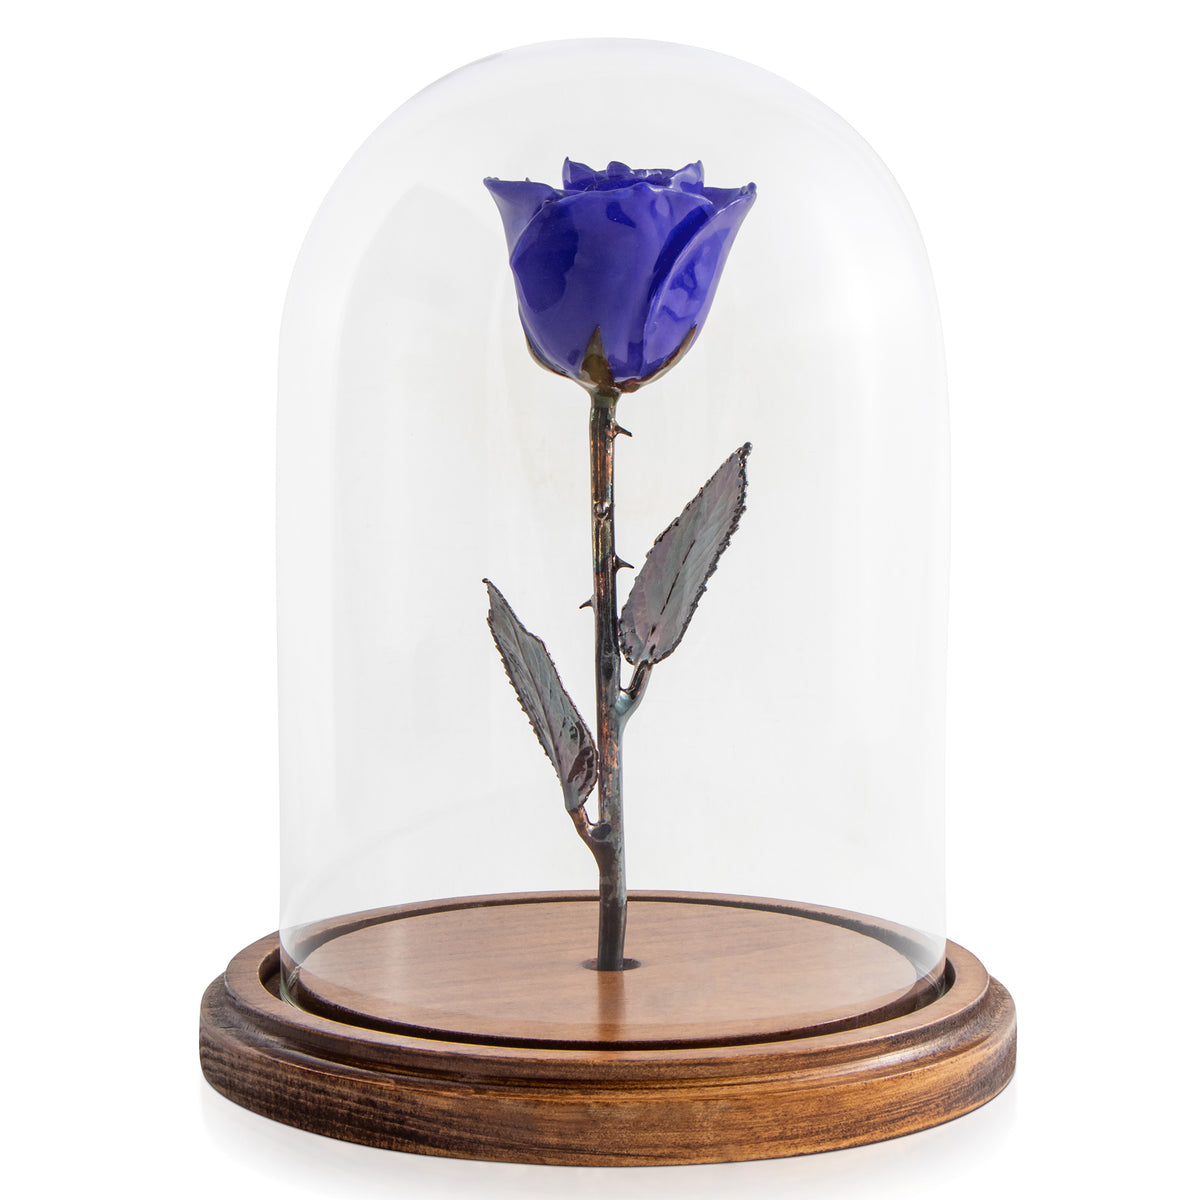 Violet Pearl Enchanted Rose (aka Beauty &amp; The Beast Rose) with Patina Copper Stem Mounted to A Hand Turned Solid Wood Base under a glass dome.